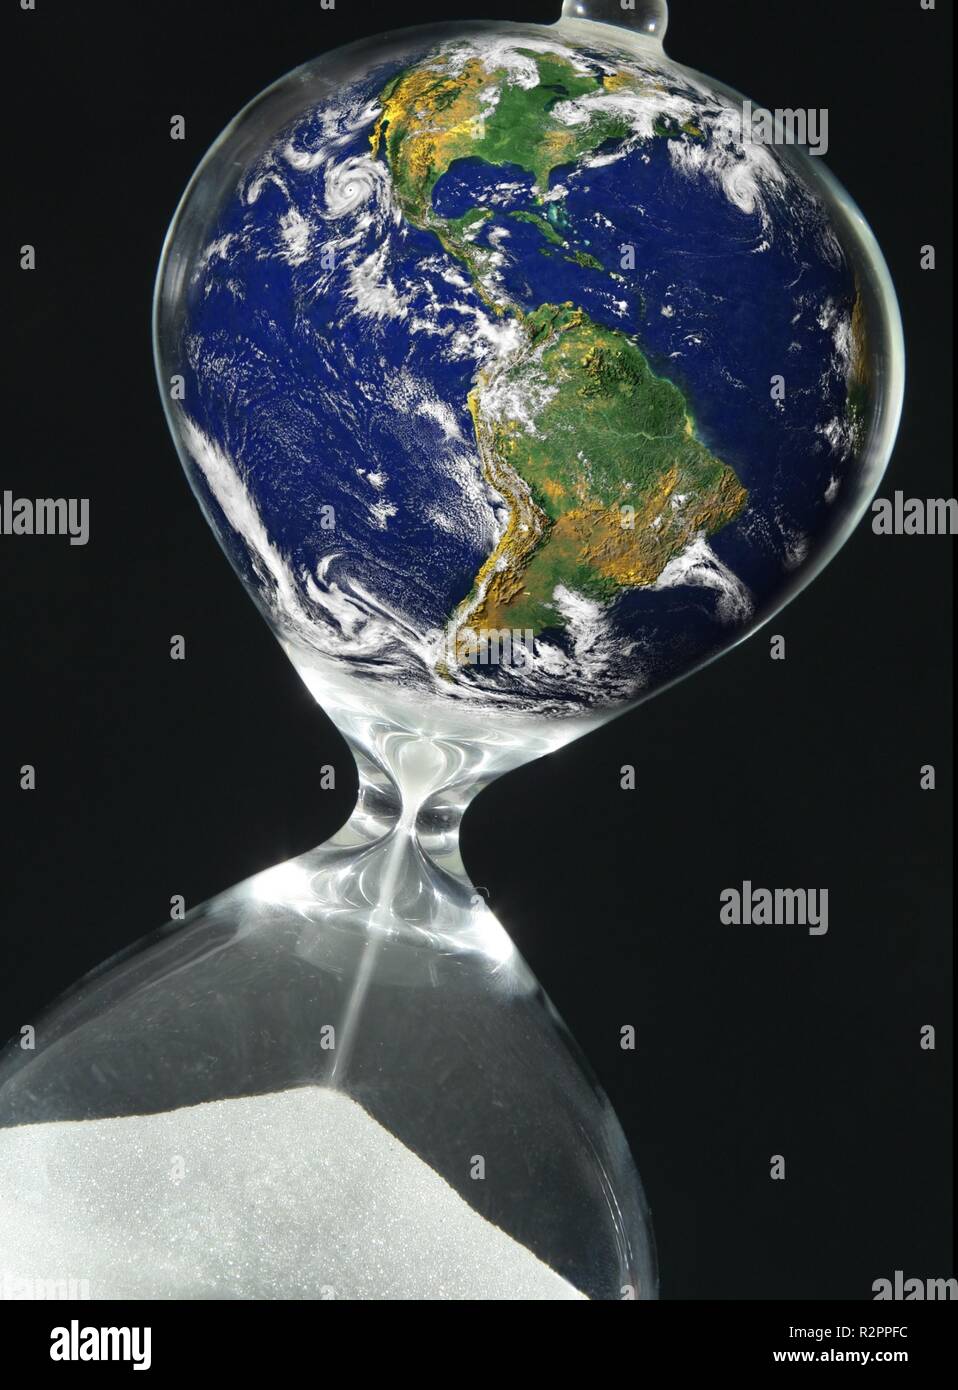 climate change Stock Photo